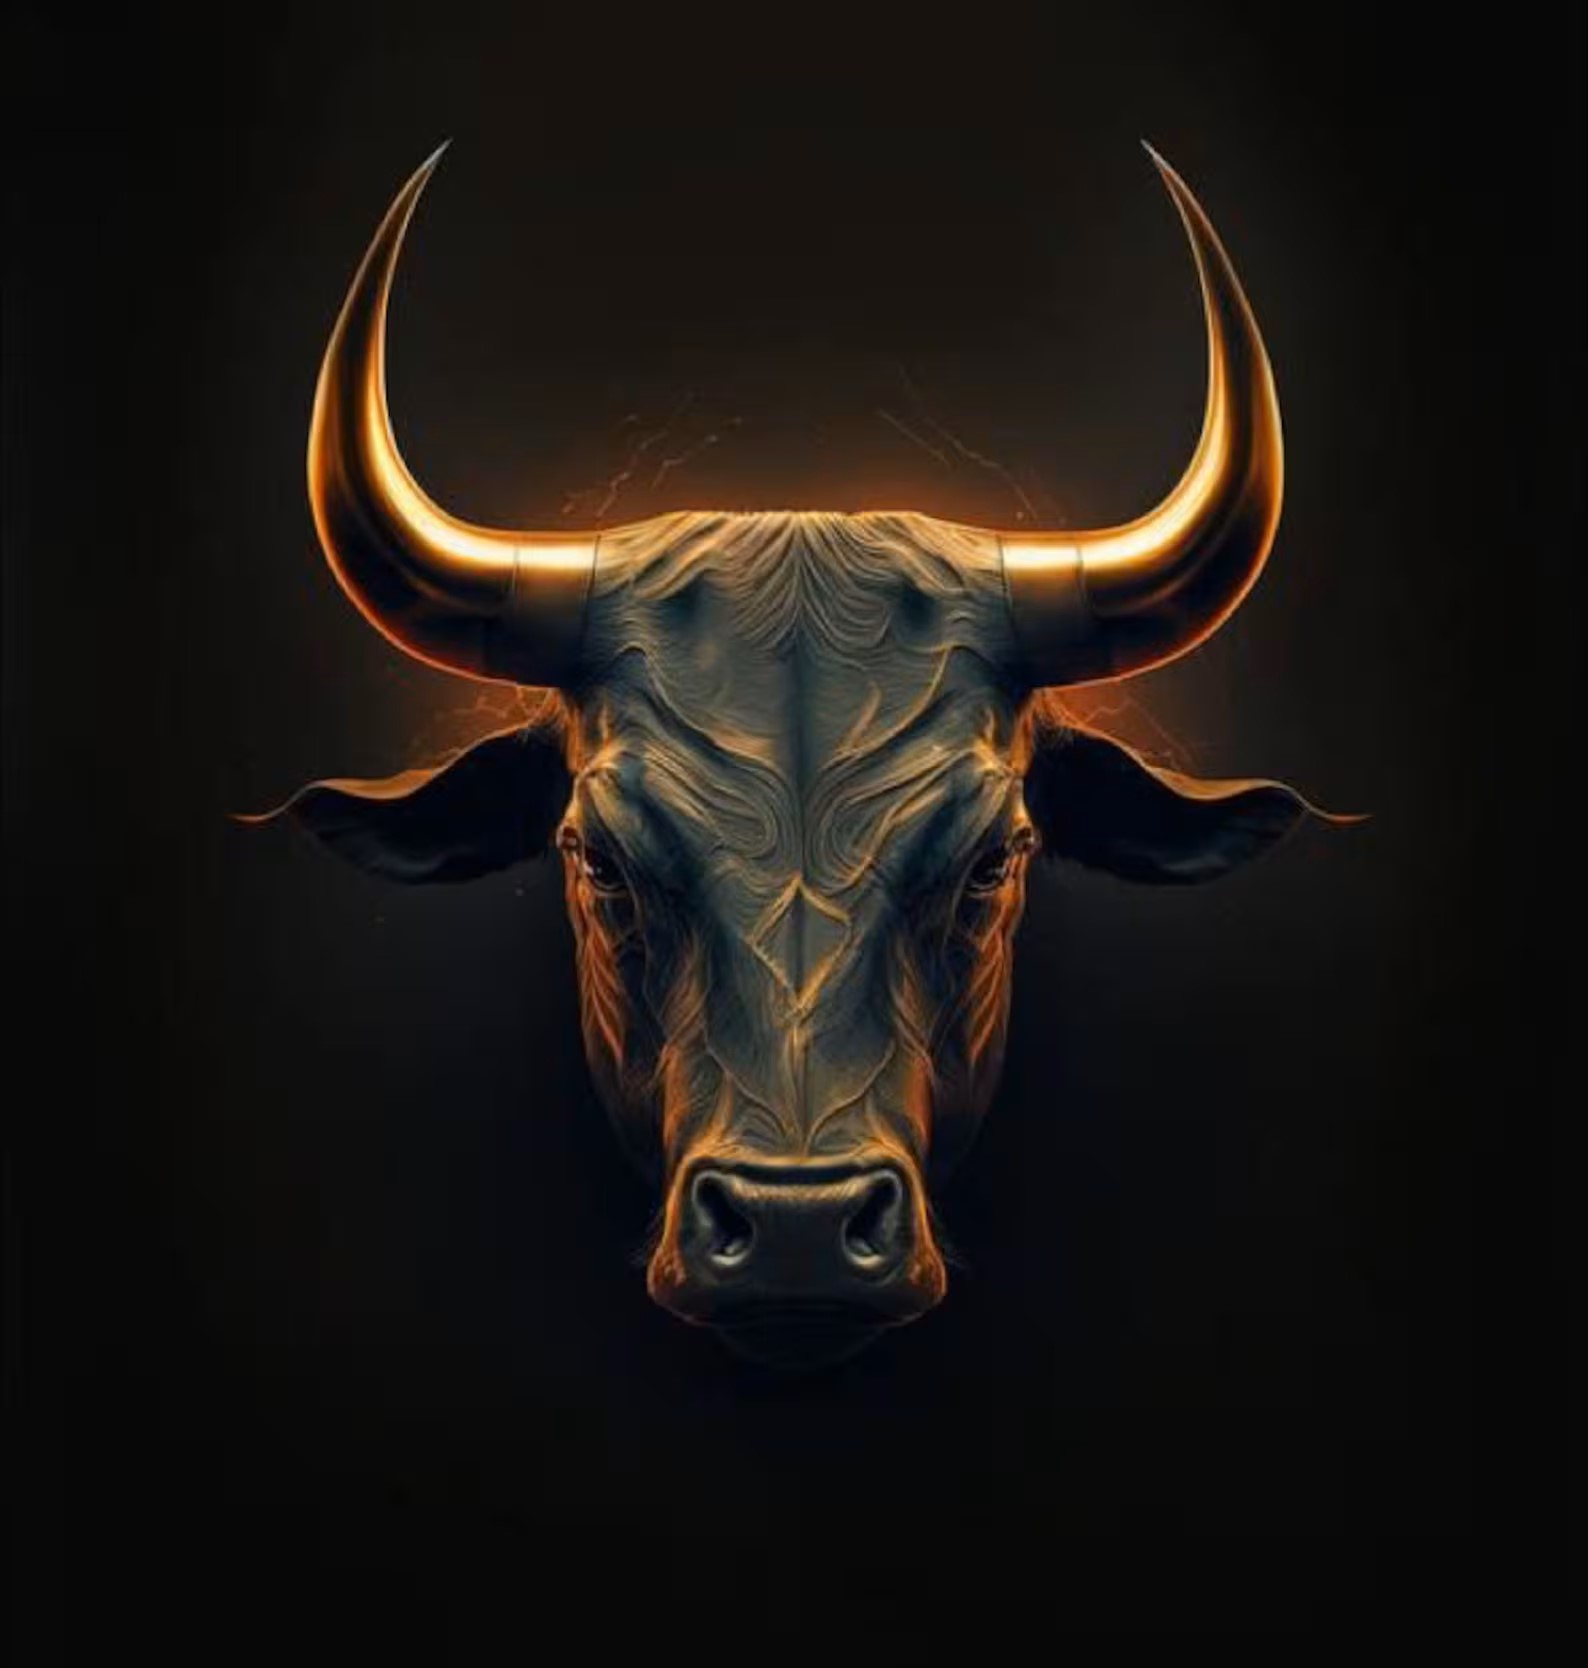 A wall street bull representing beyorch fixed interest investments